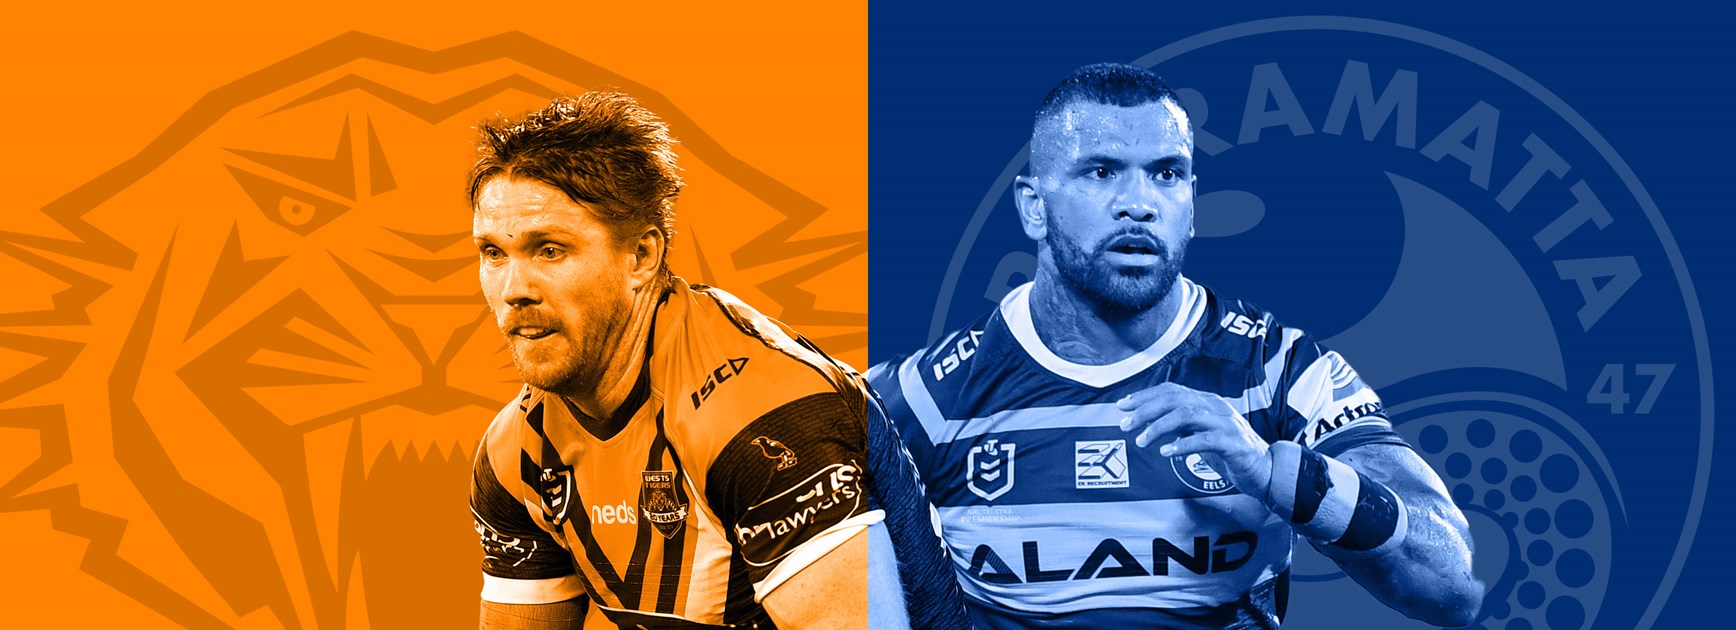 Wests Tigers v Eels, Round 17 Match Preview